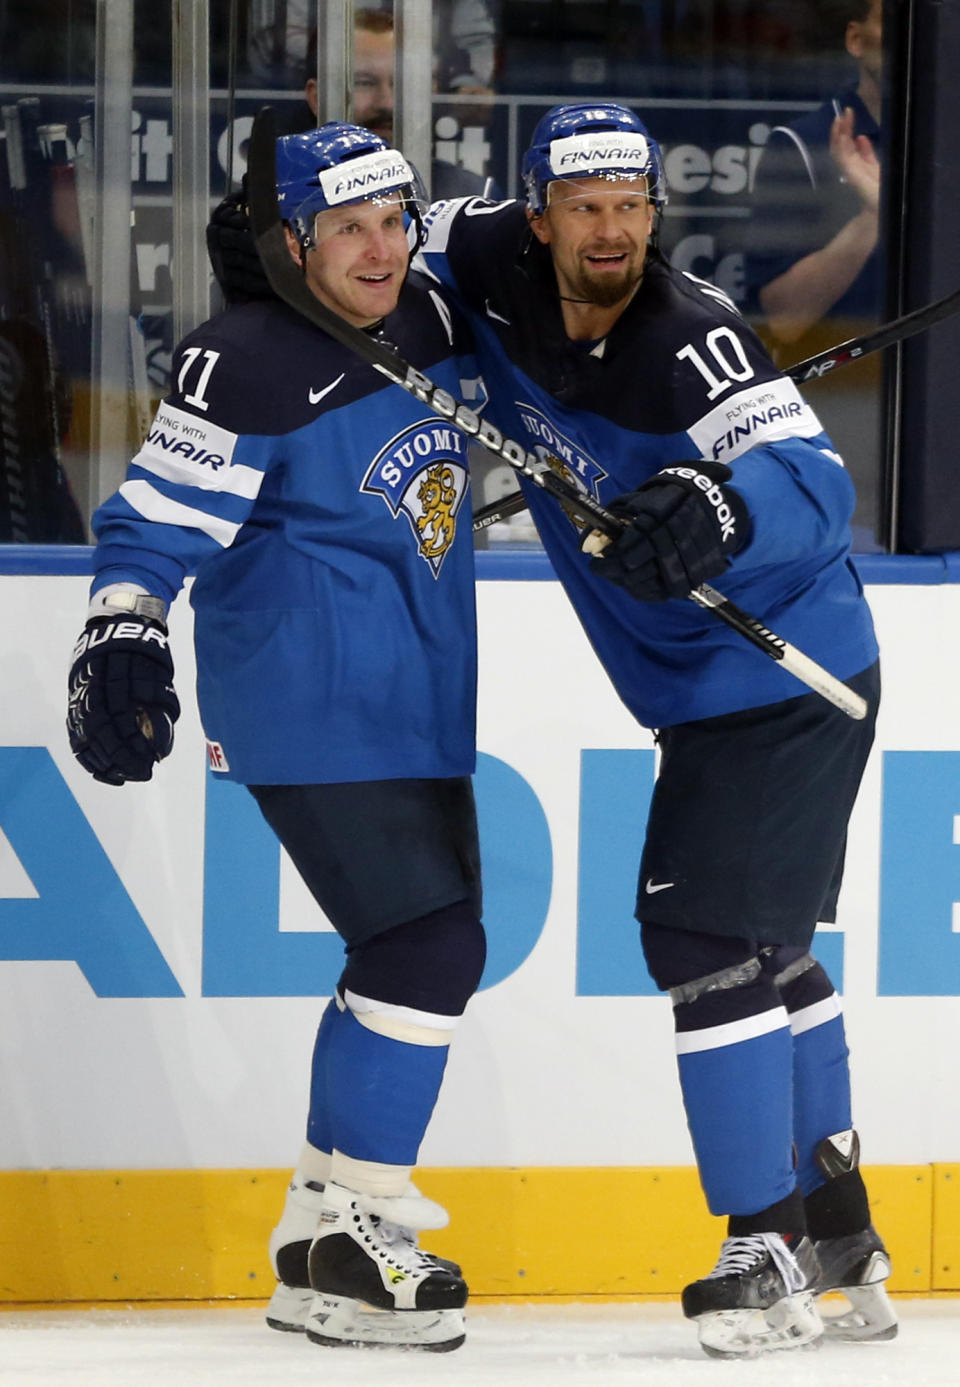 Finland forward Leo Komarov, left, celebrates a goal with Finland defender Jere Karalahti during the Group B preliminary round match between Germany and Finland at the Ice Hockey World Championship in Minsk, Belarus, Tuesday, May 13, 2014. (AP Photo/Darko Bandic)